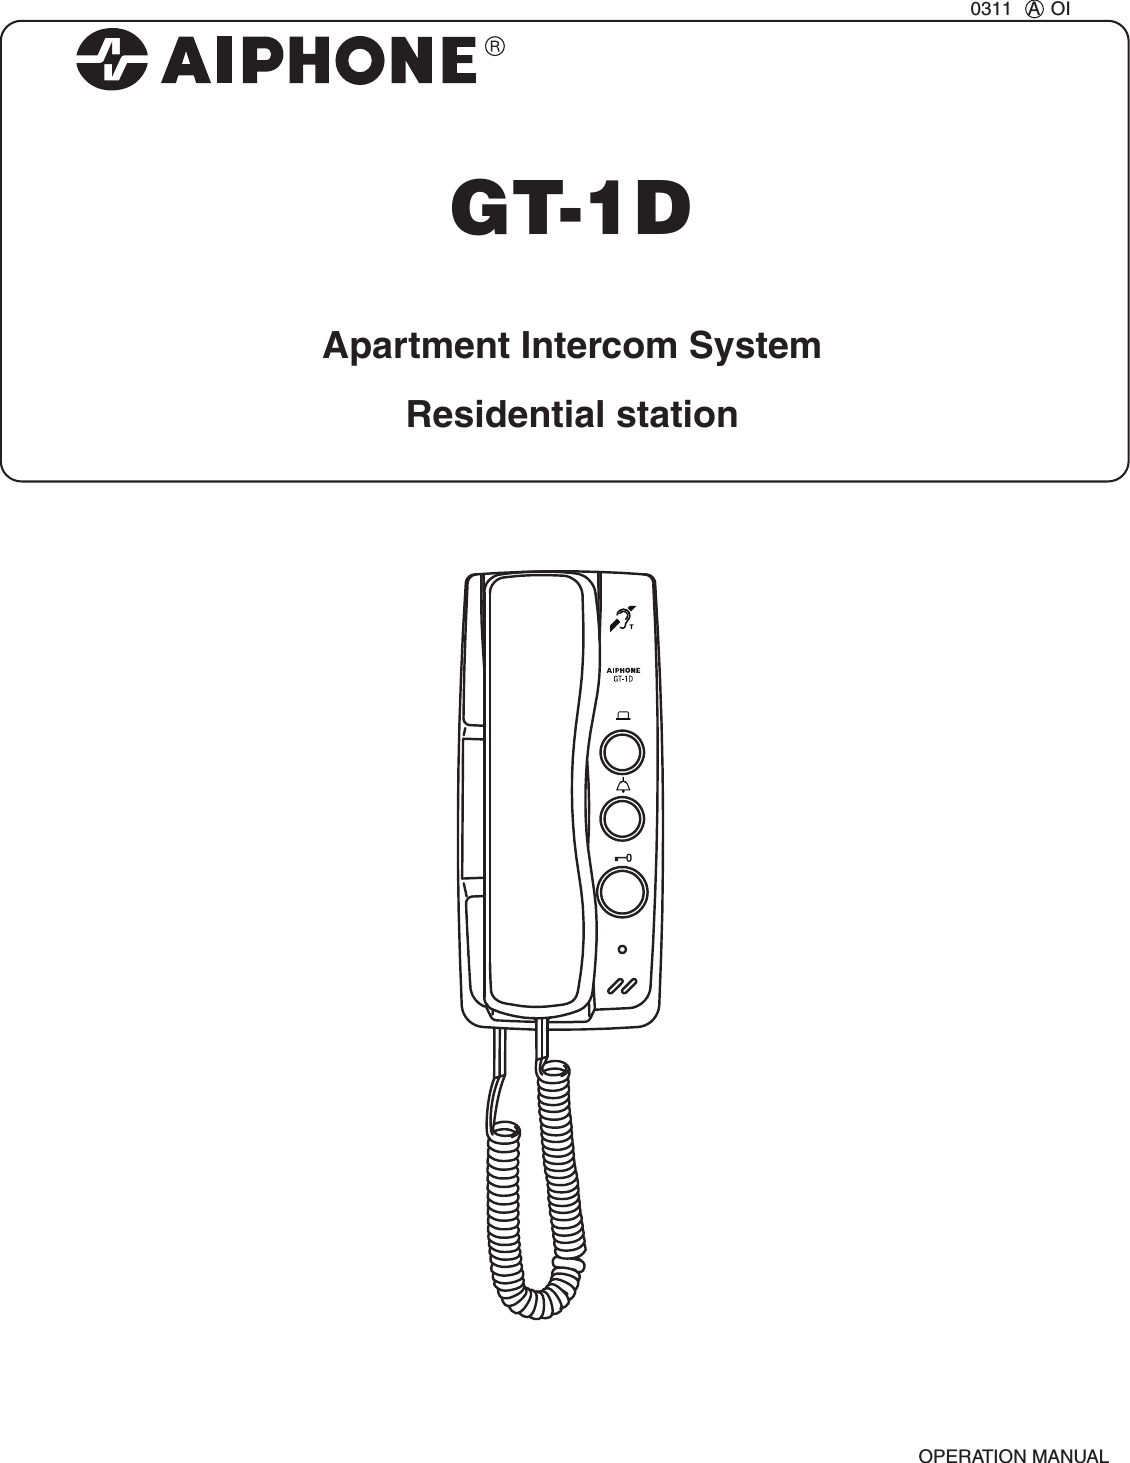 Page 1 of 8 - Aiphone GT1D取説-EN GT-1D Apartment Intercom System Residential Station GT-1DOperation Manual